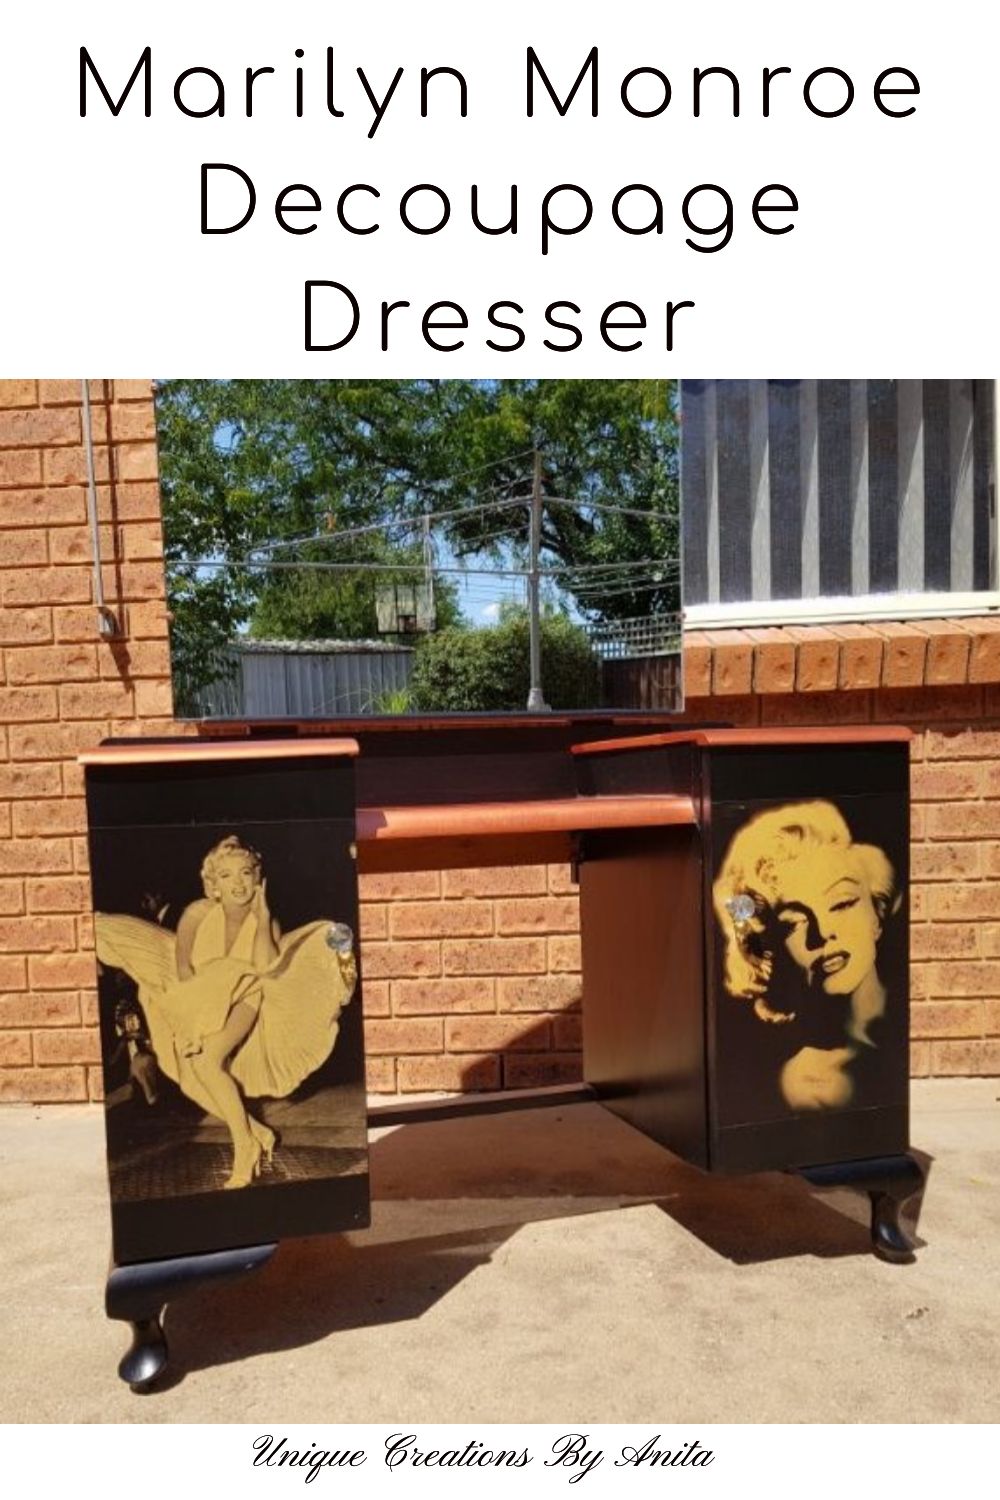 Old dresser gets a Marilyn Monroe themed decoupage makeover 